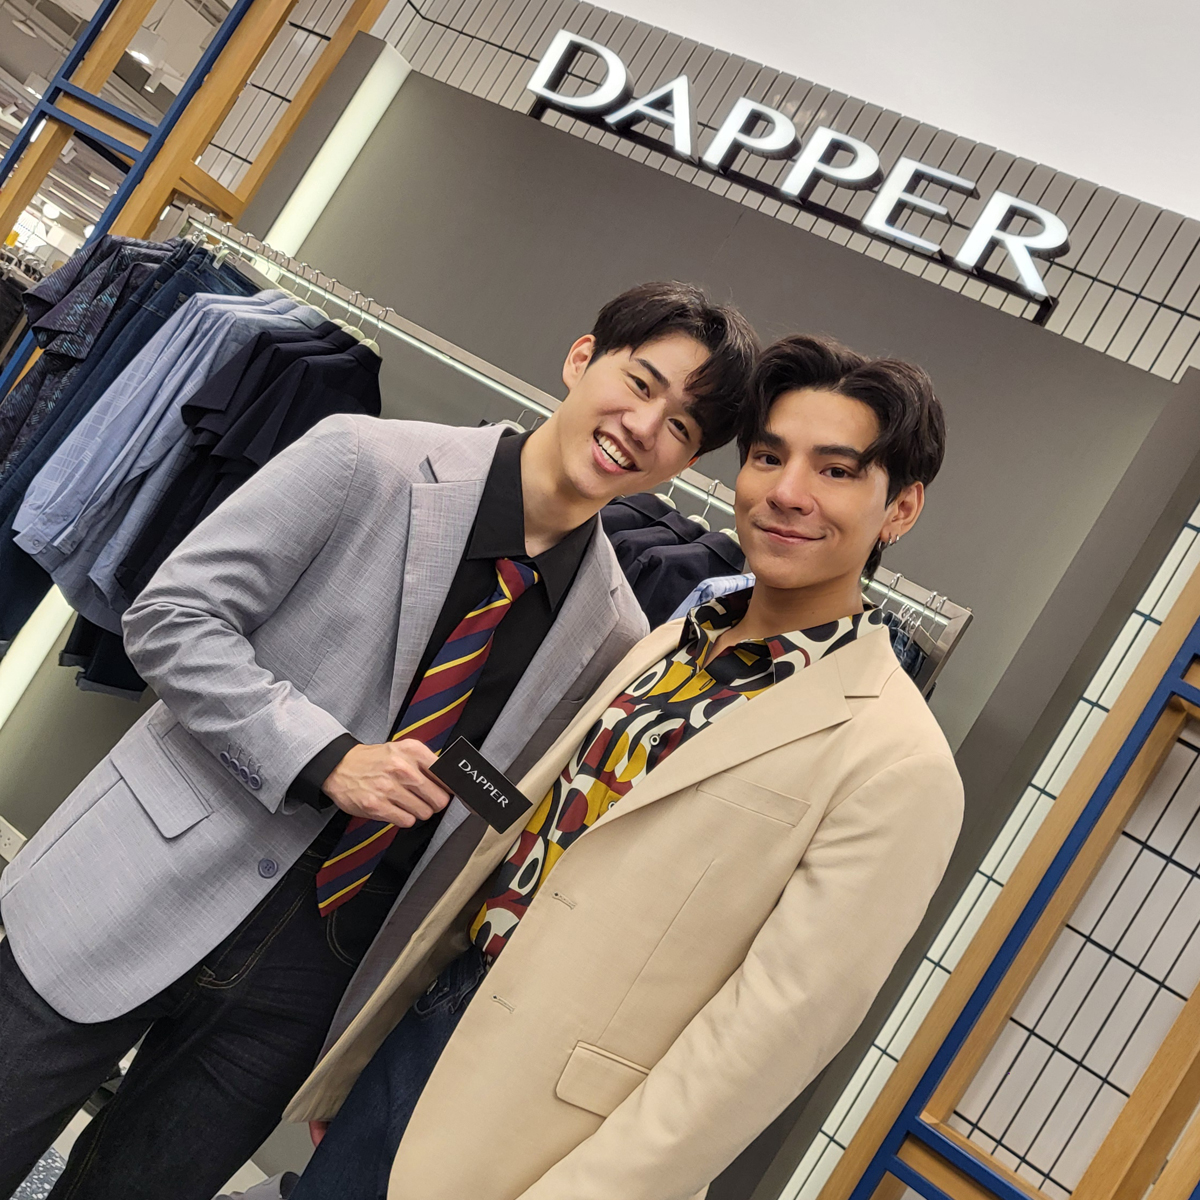 Grand Opening DAPPER @Central Fashion Island, DAPPER | Style, Like No Others!